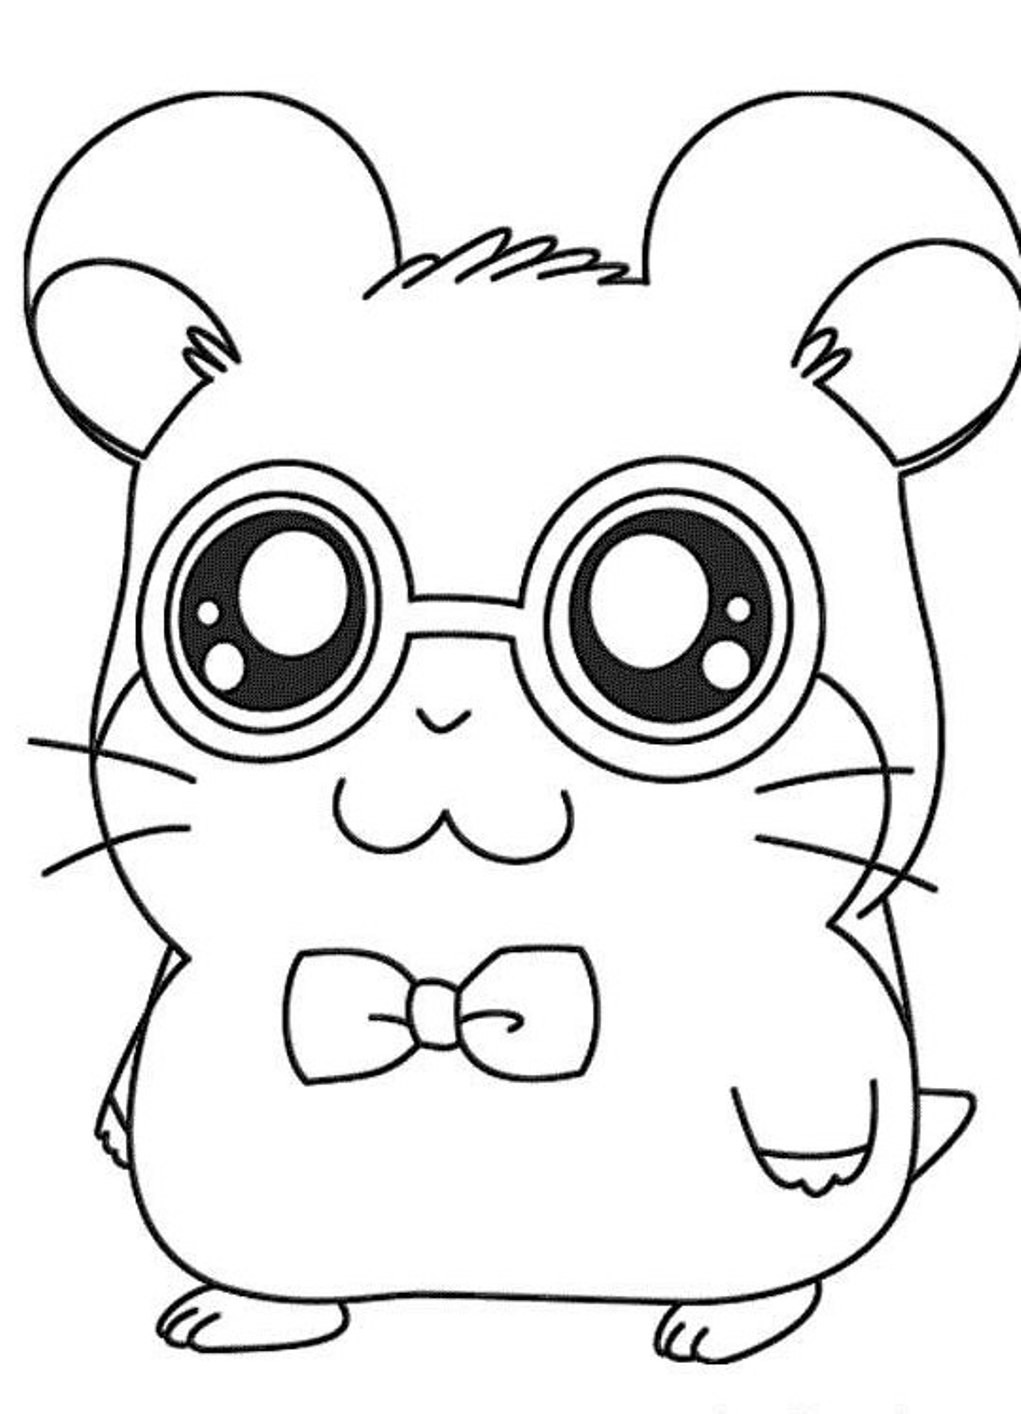 Cute Easy Coloring Pages at Free printable colorings